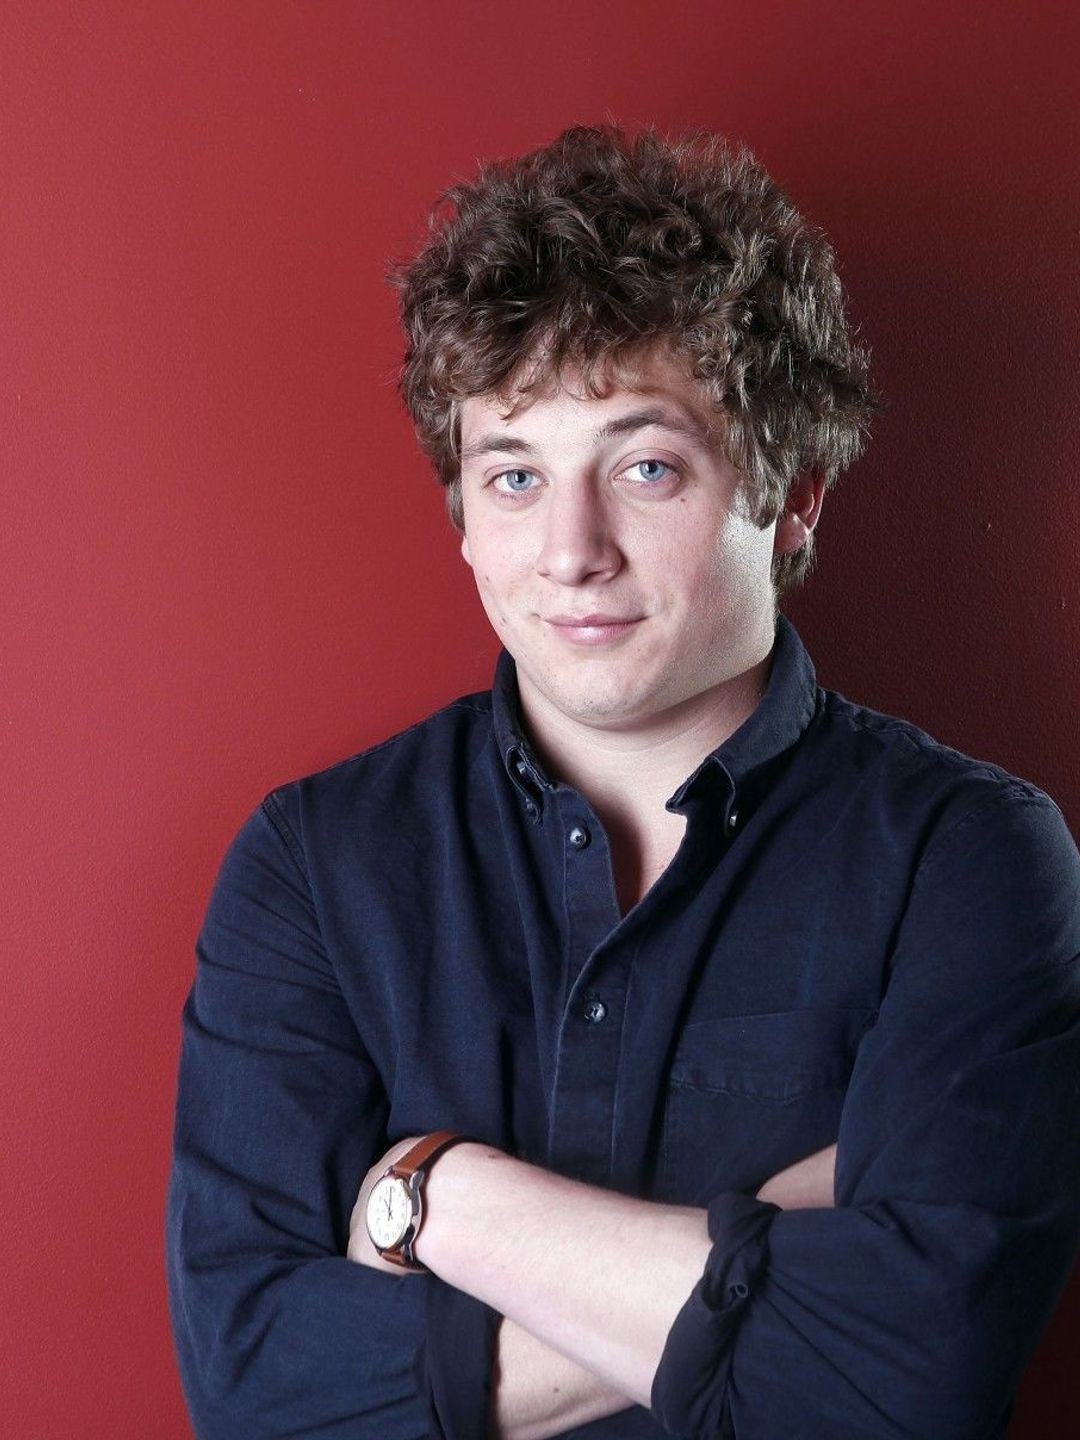 Jeremy Allen White where did he study